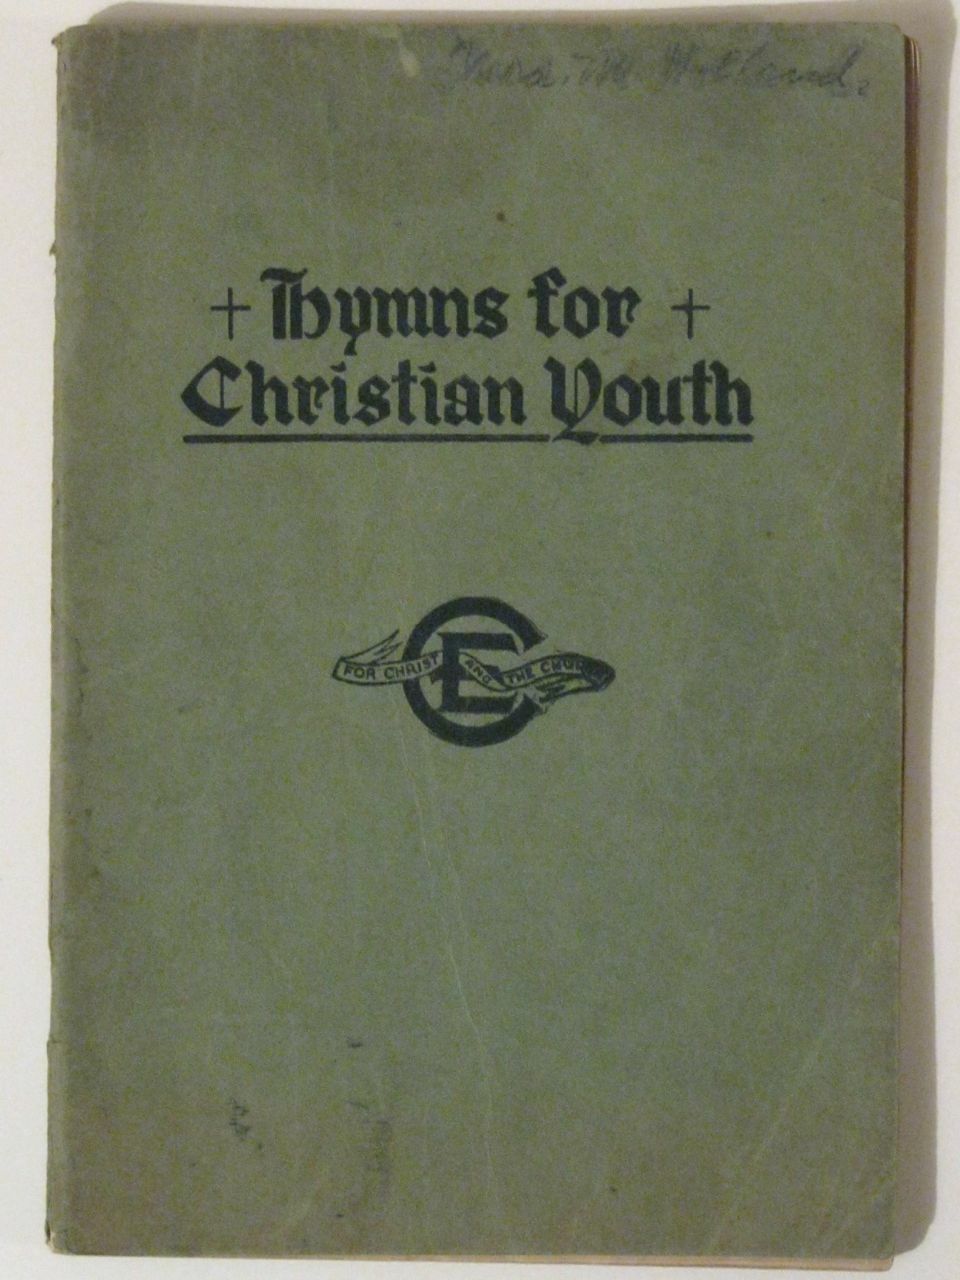 Vintage 1927 HYMNS for CHRISTIAN YOUTH Song Book